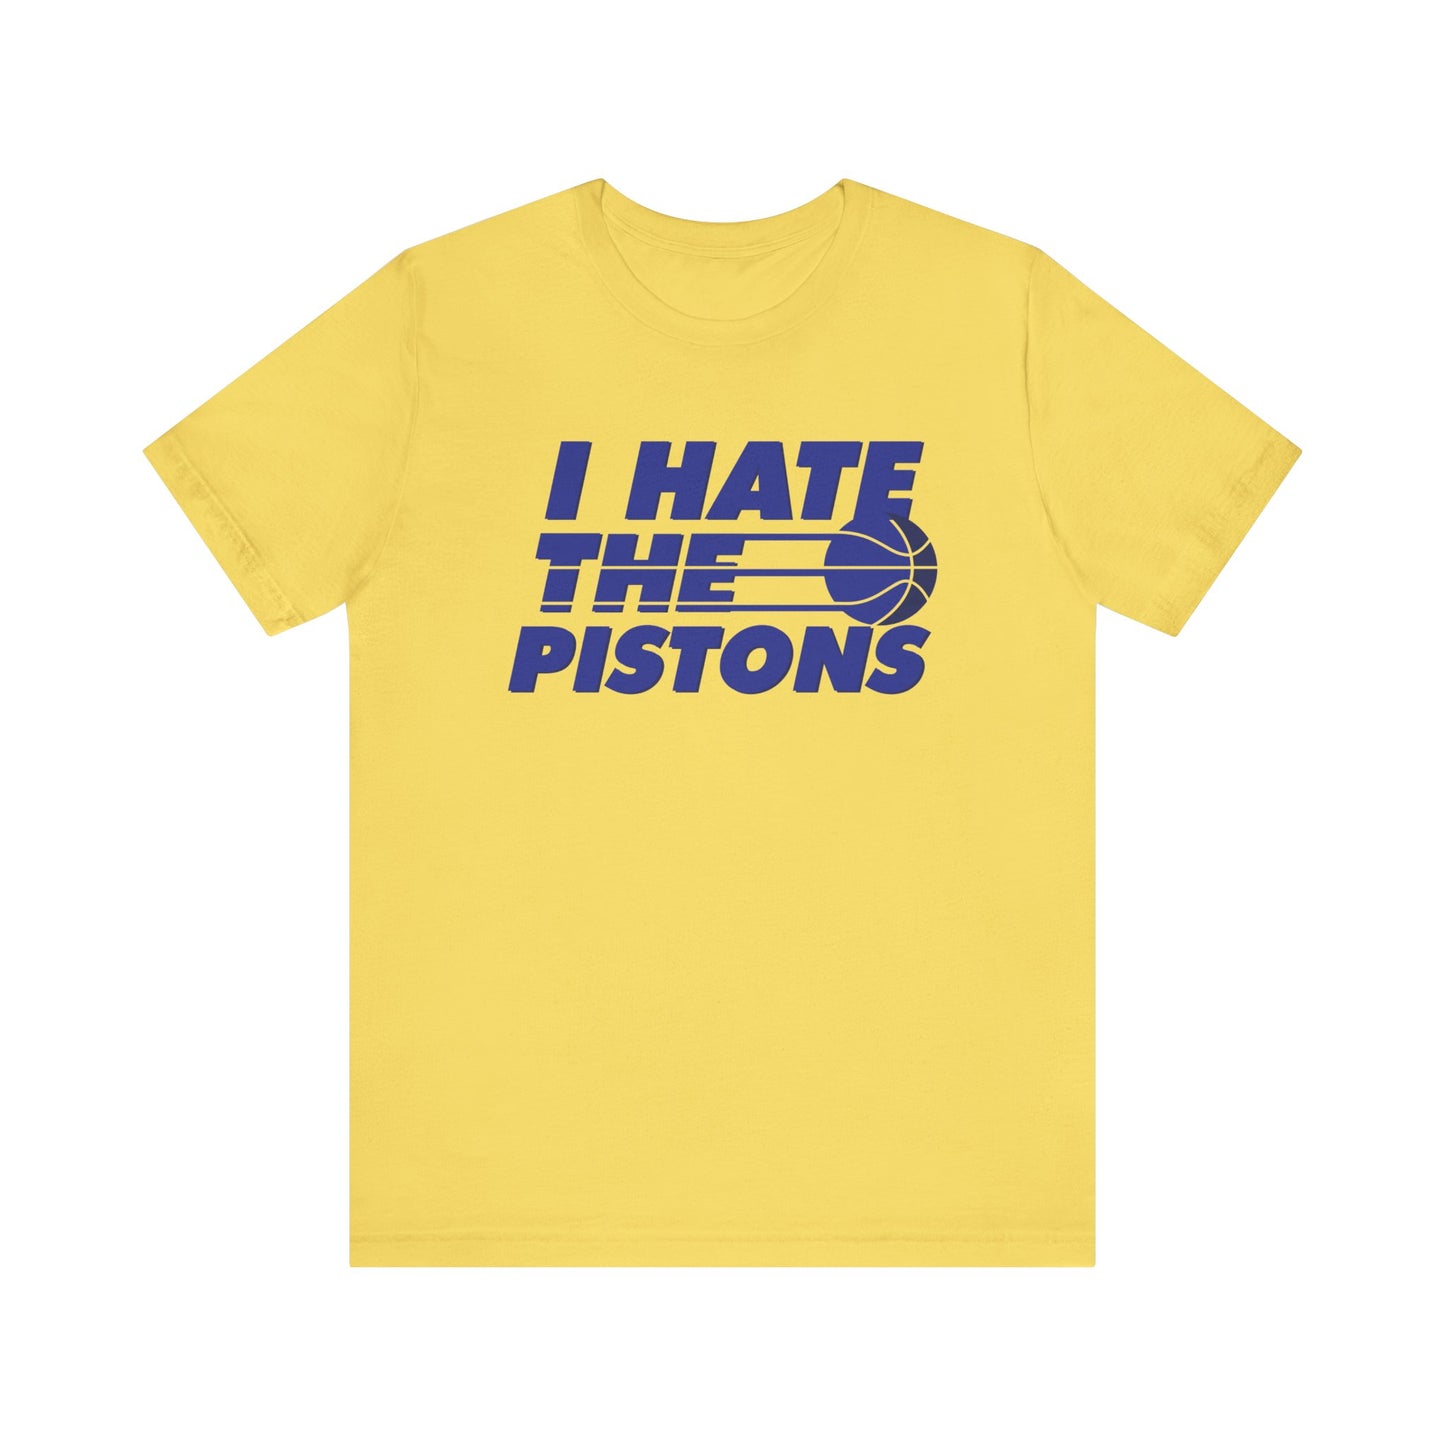 I Hate The Pisstuns (for Indiana fans) - Unisex Jersey Short Sleeve Tee